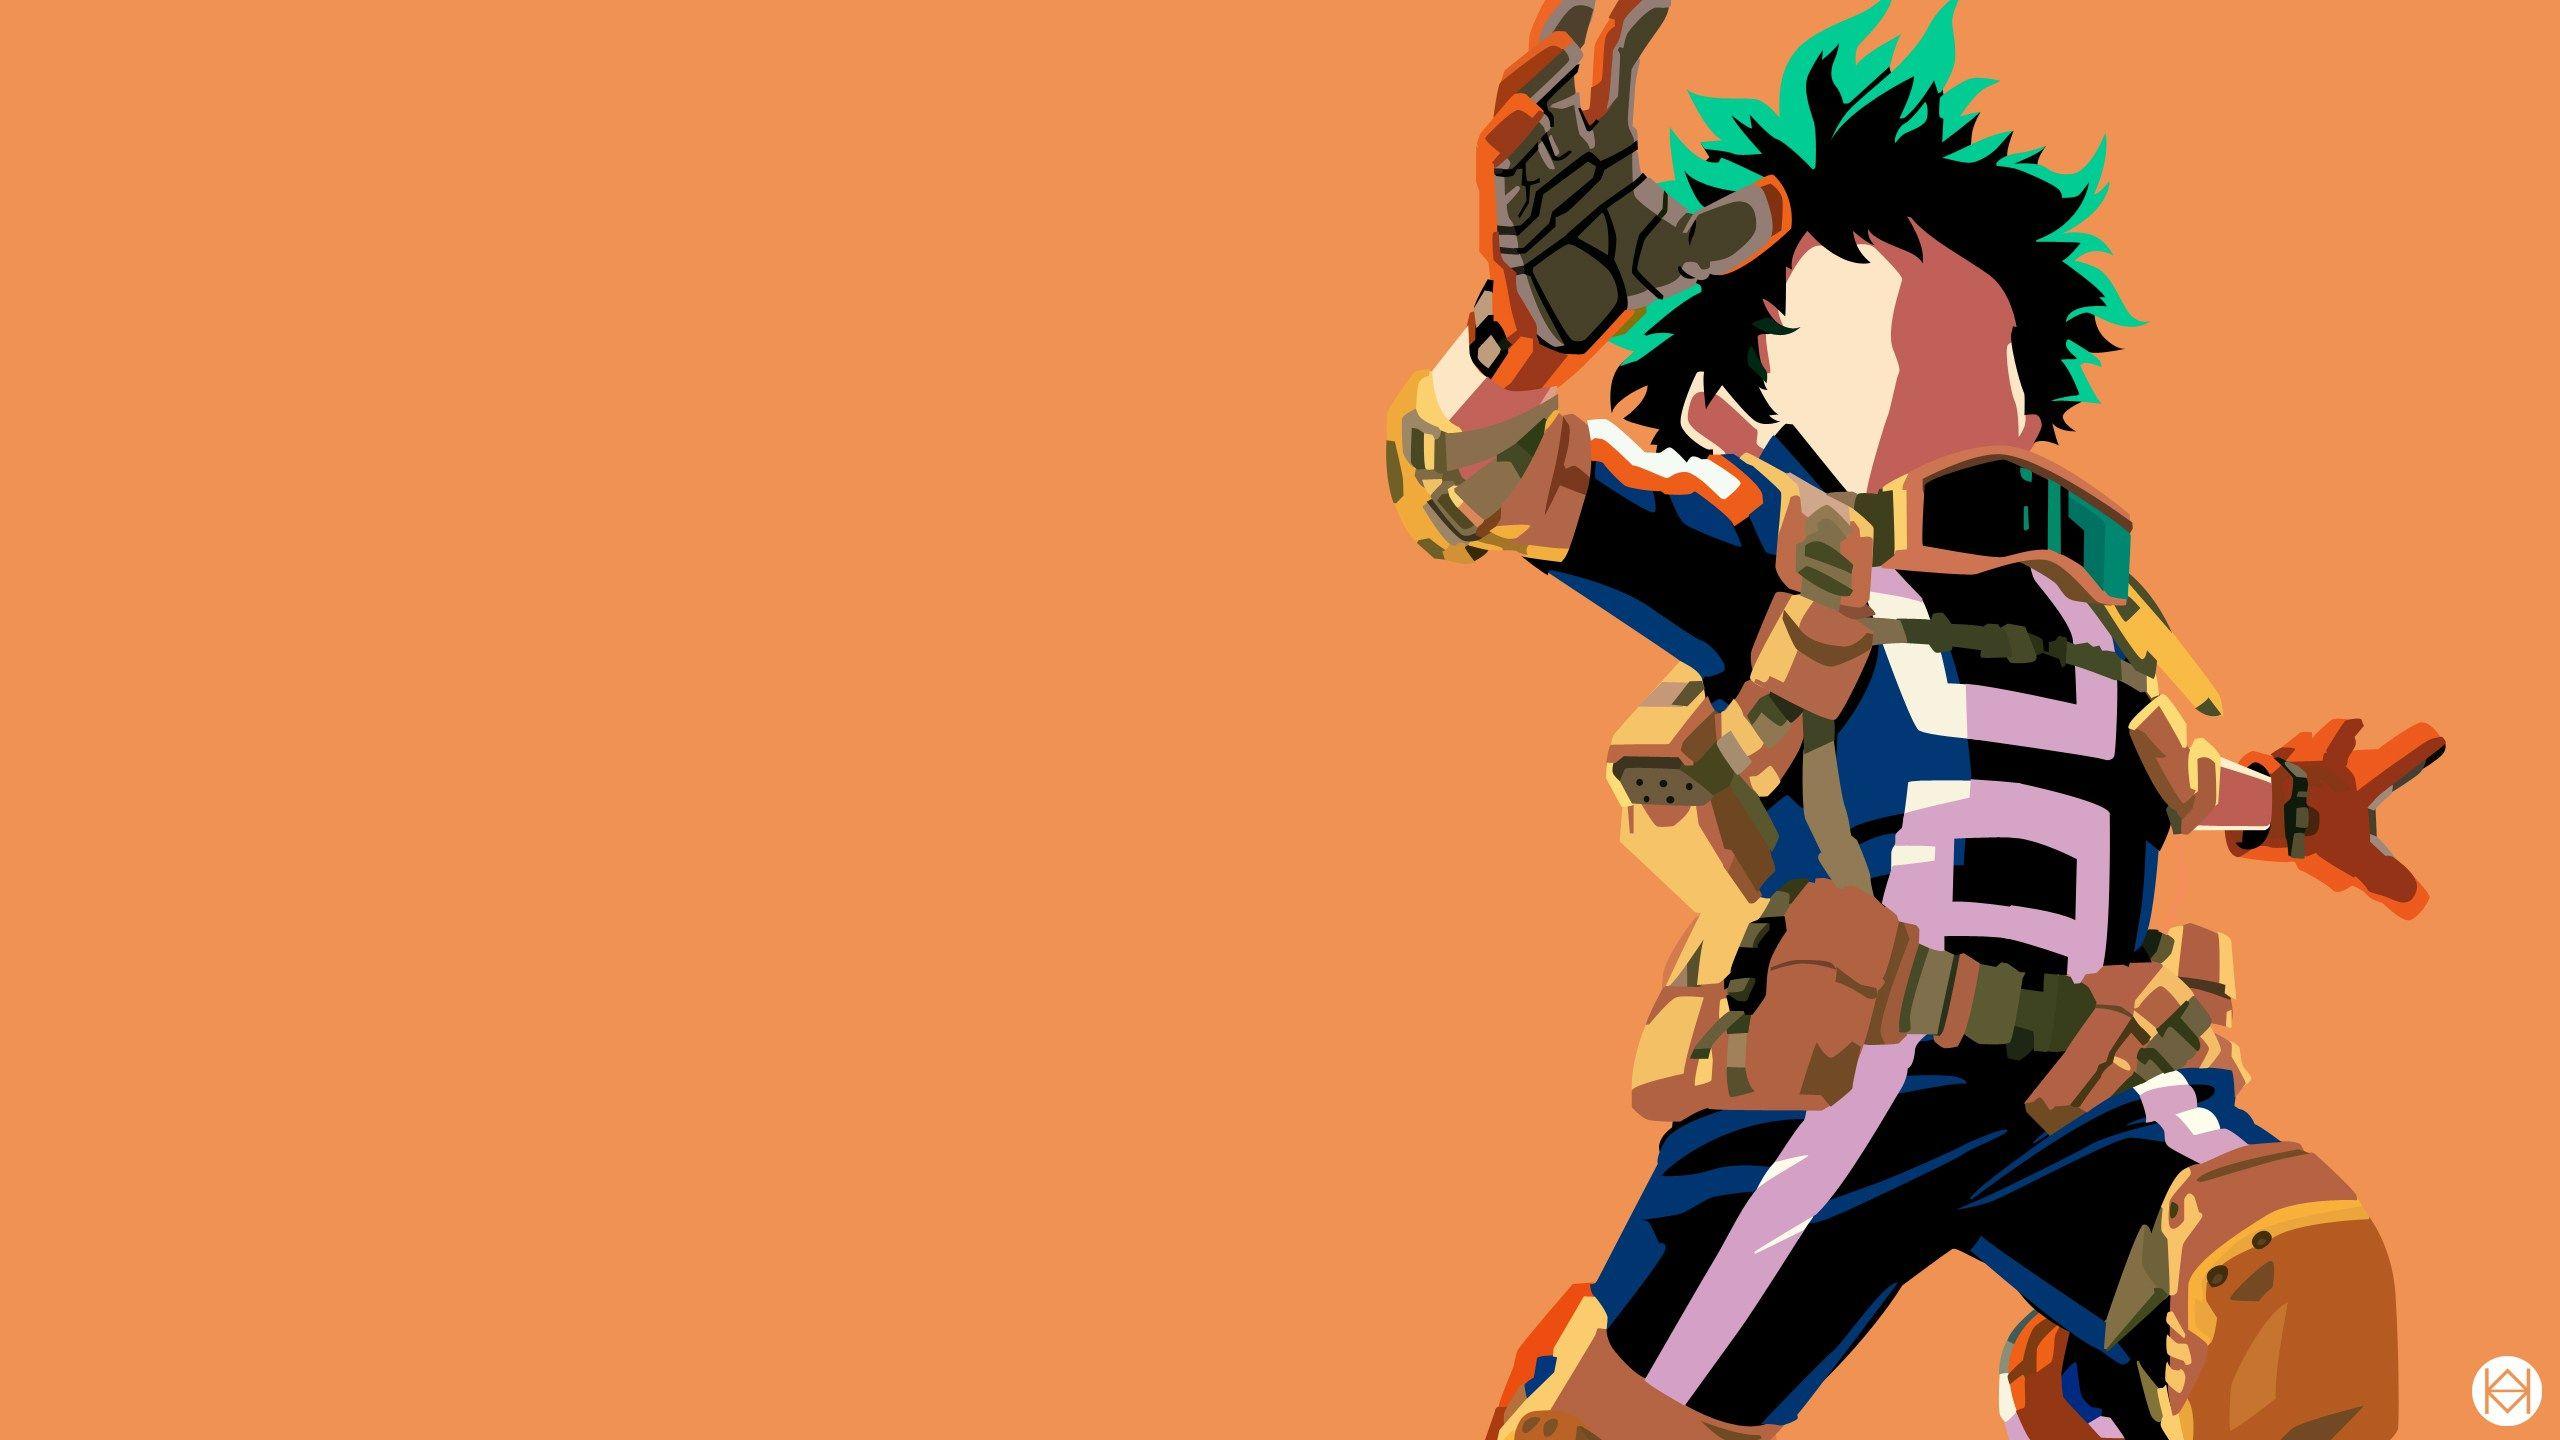 Check out more awesome minimalist wallpaper at My Hero Academia